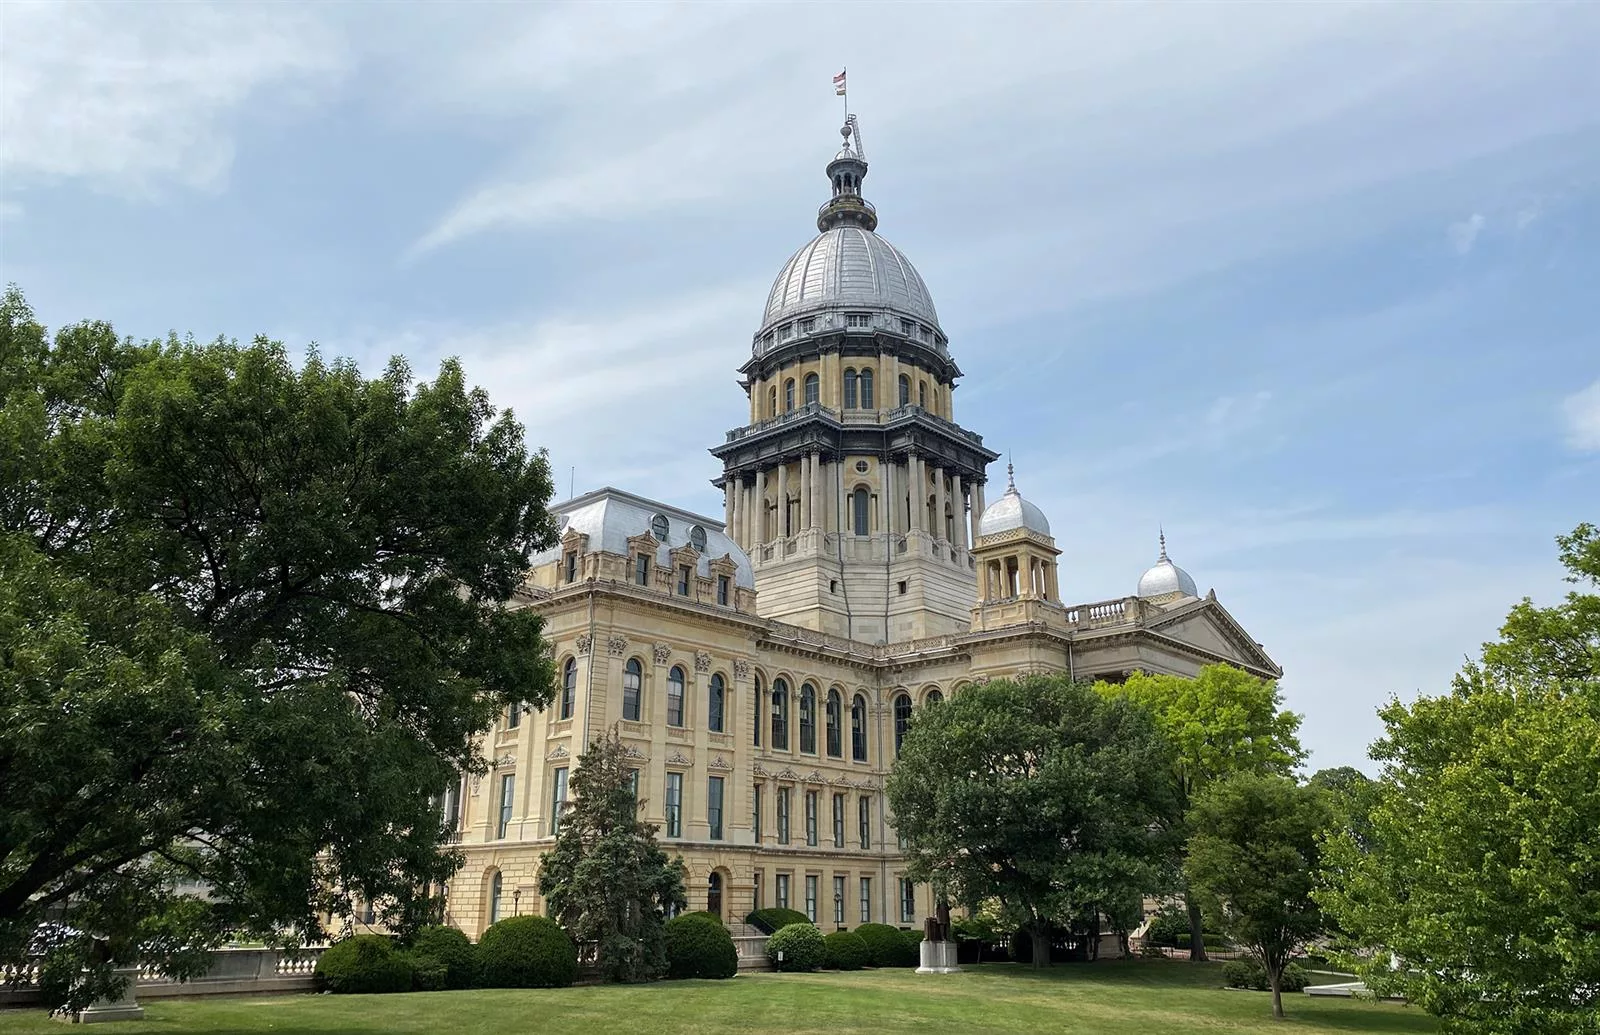 The Illinois State Capitol is pictured in Springfield. (Capitol News Illinois photo by Jerry Nowicki)